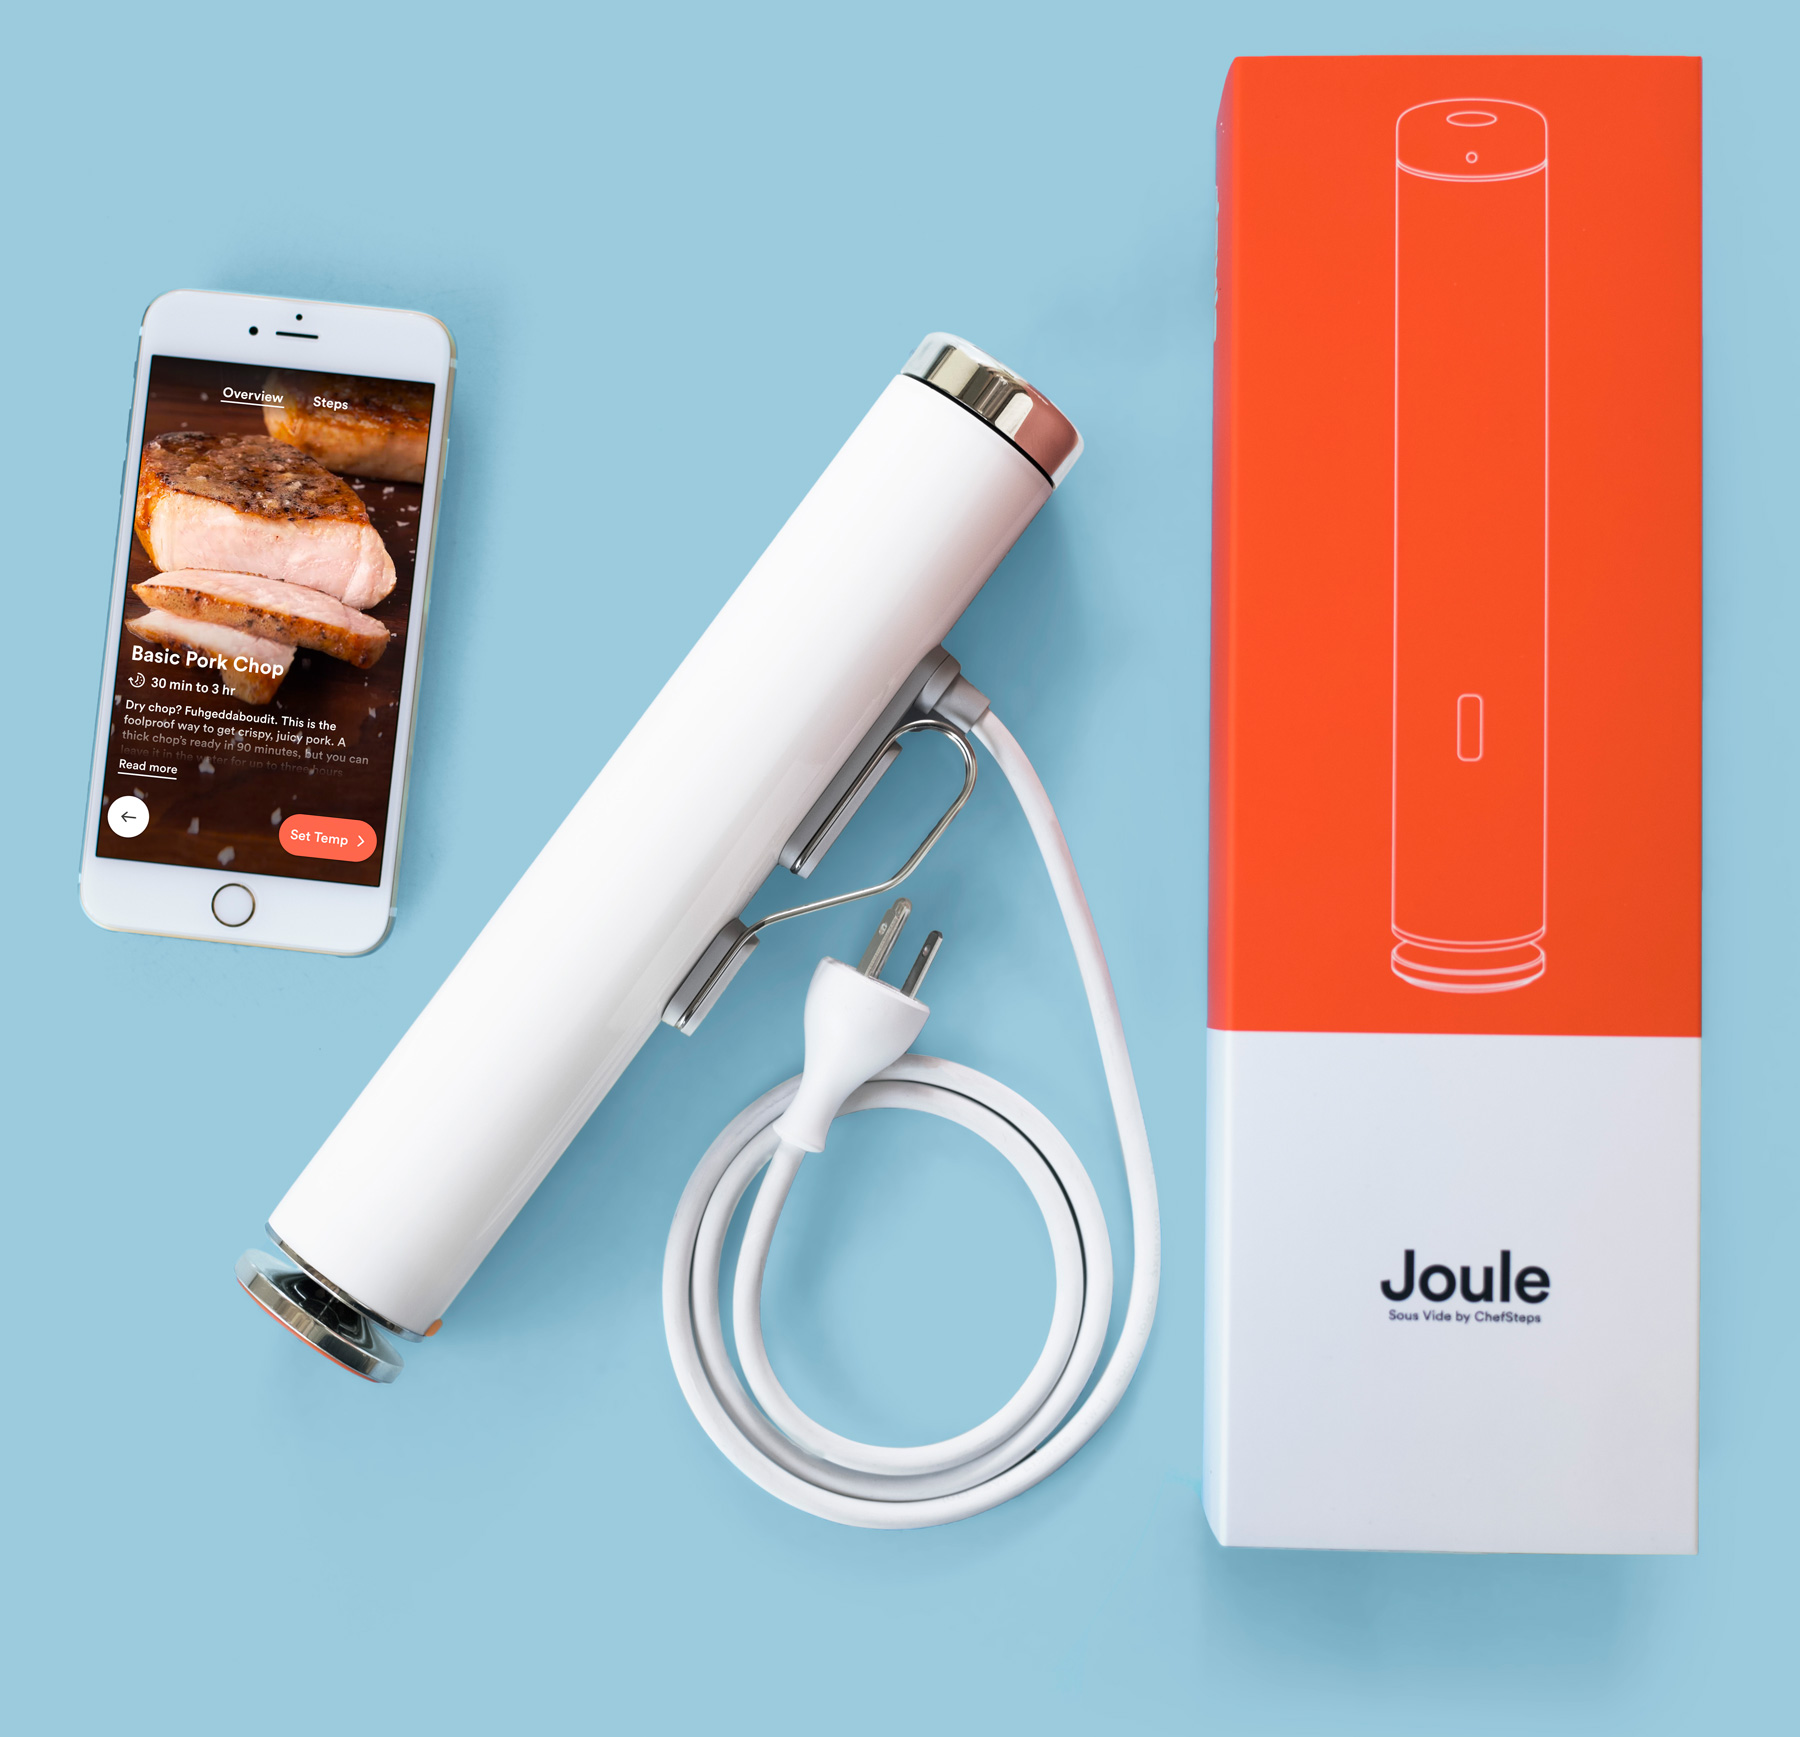 Joule, Kitchen, Nwt Joule Sous Vide By Chefsteps